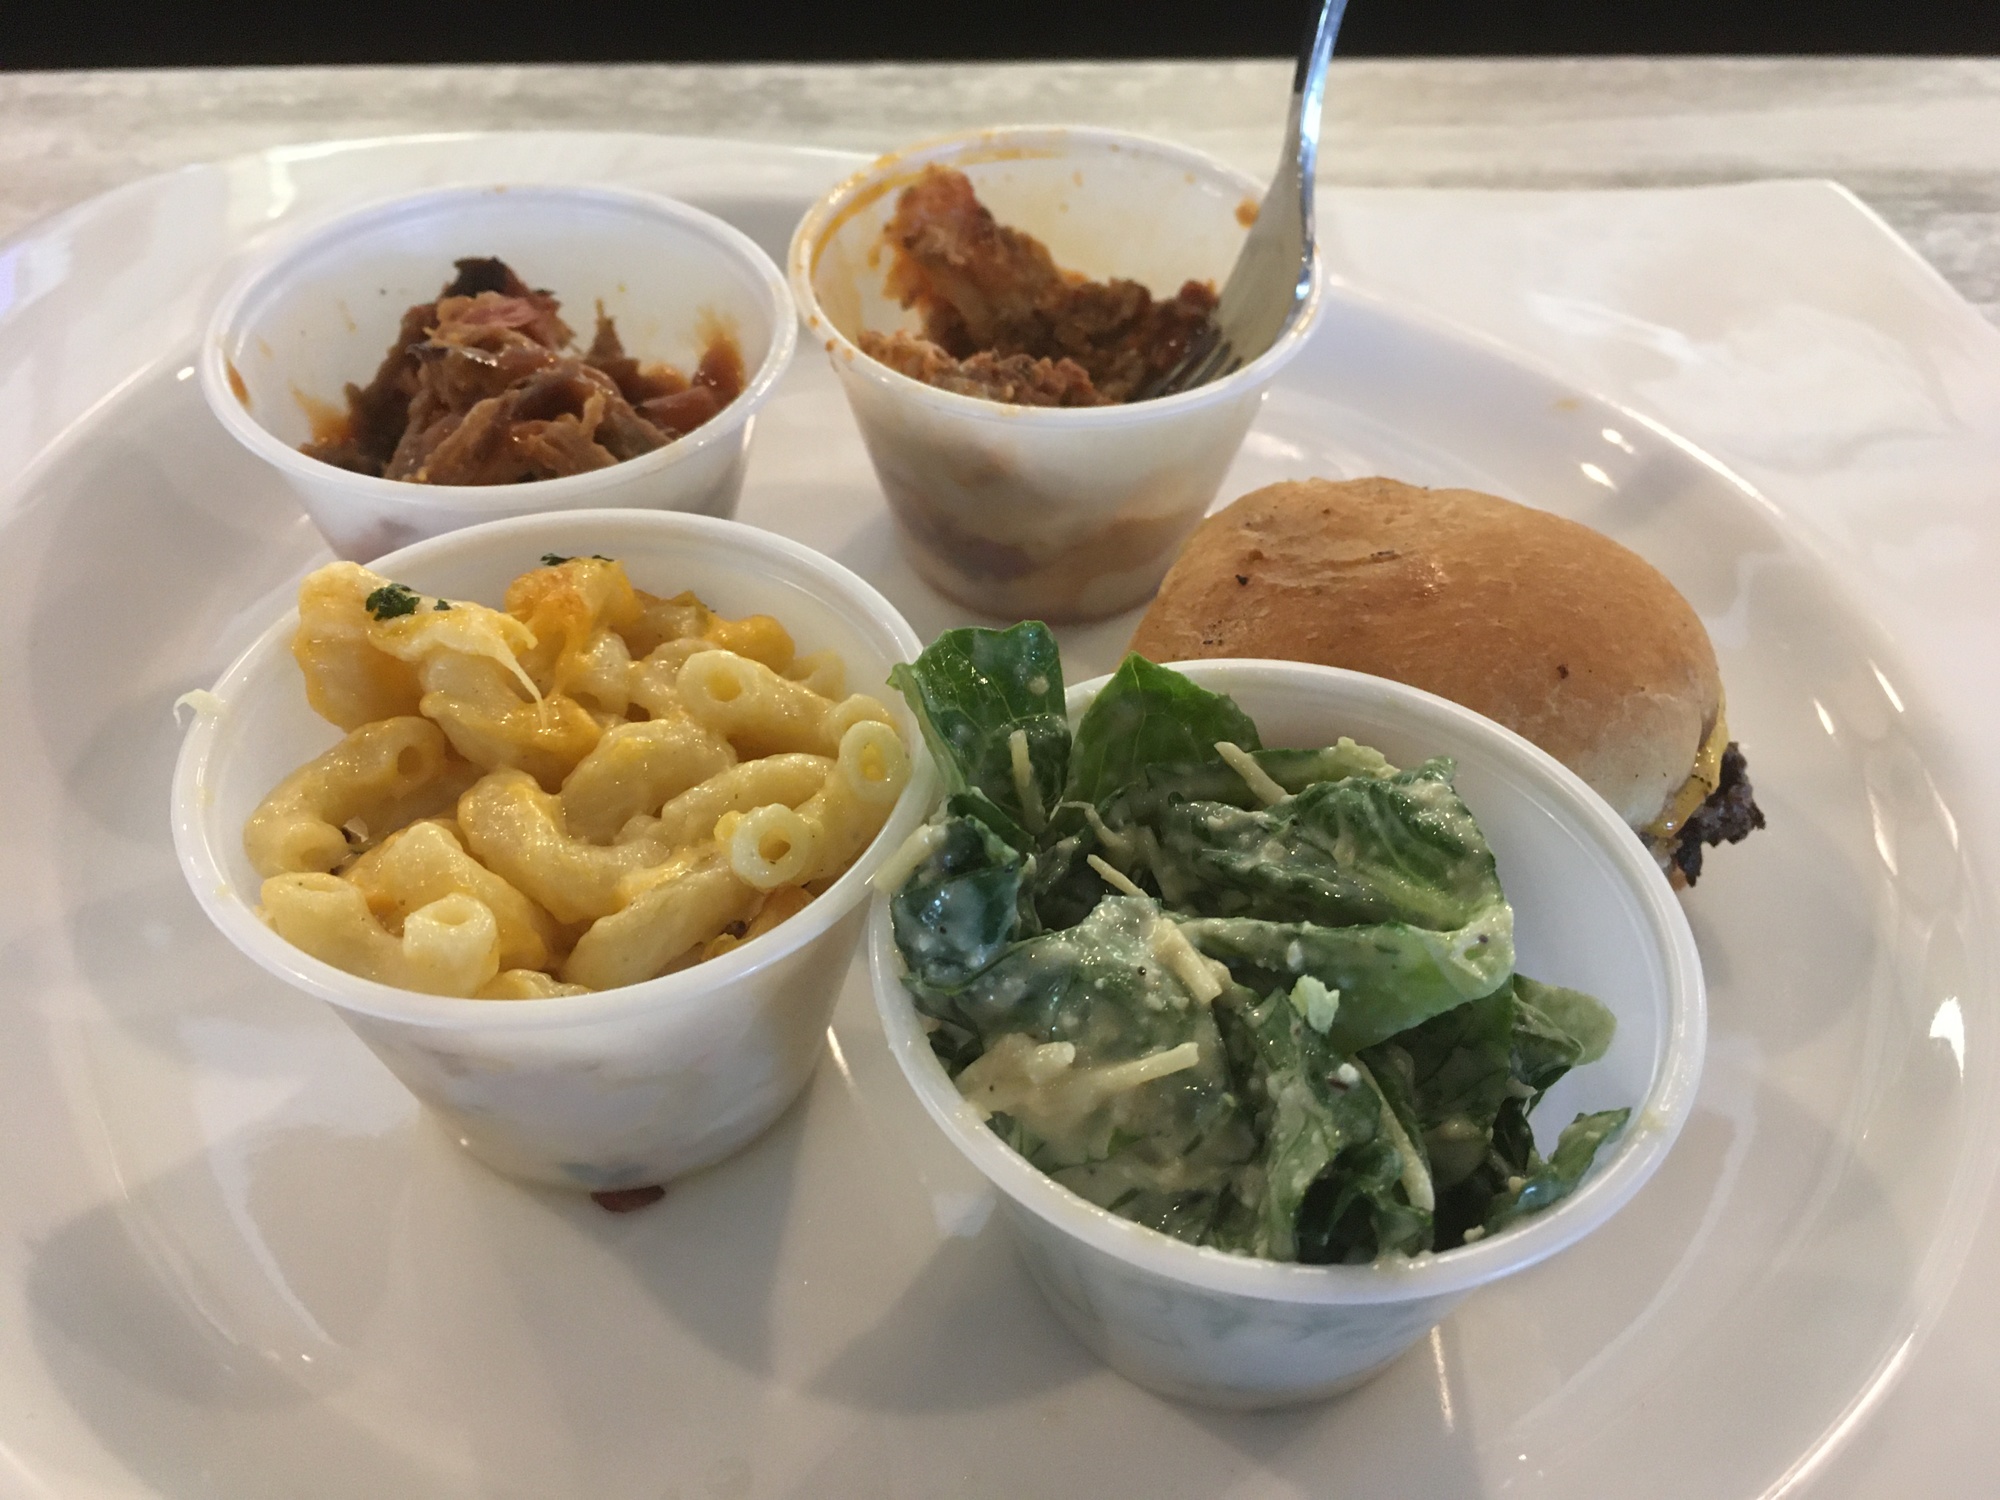 Brian Hartz. From lasagna and barbecue to sliders, salads and mac and cheese, 22 South has something for everyone.